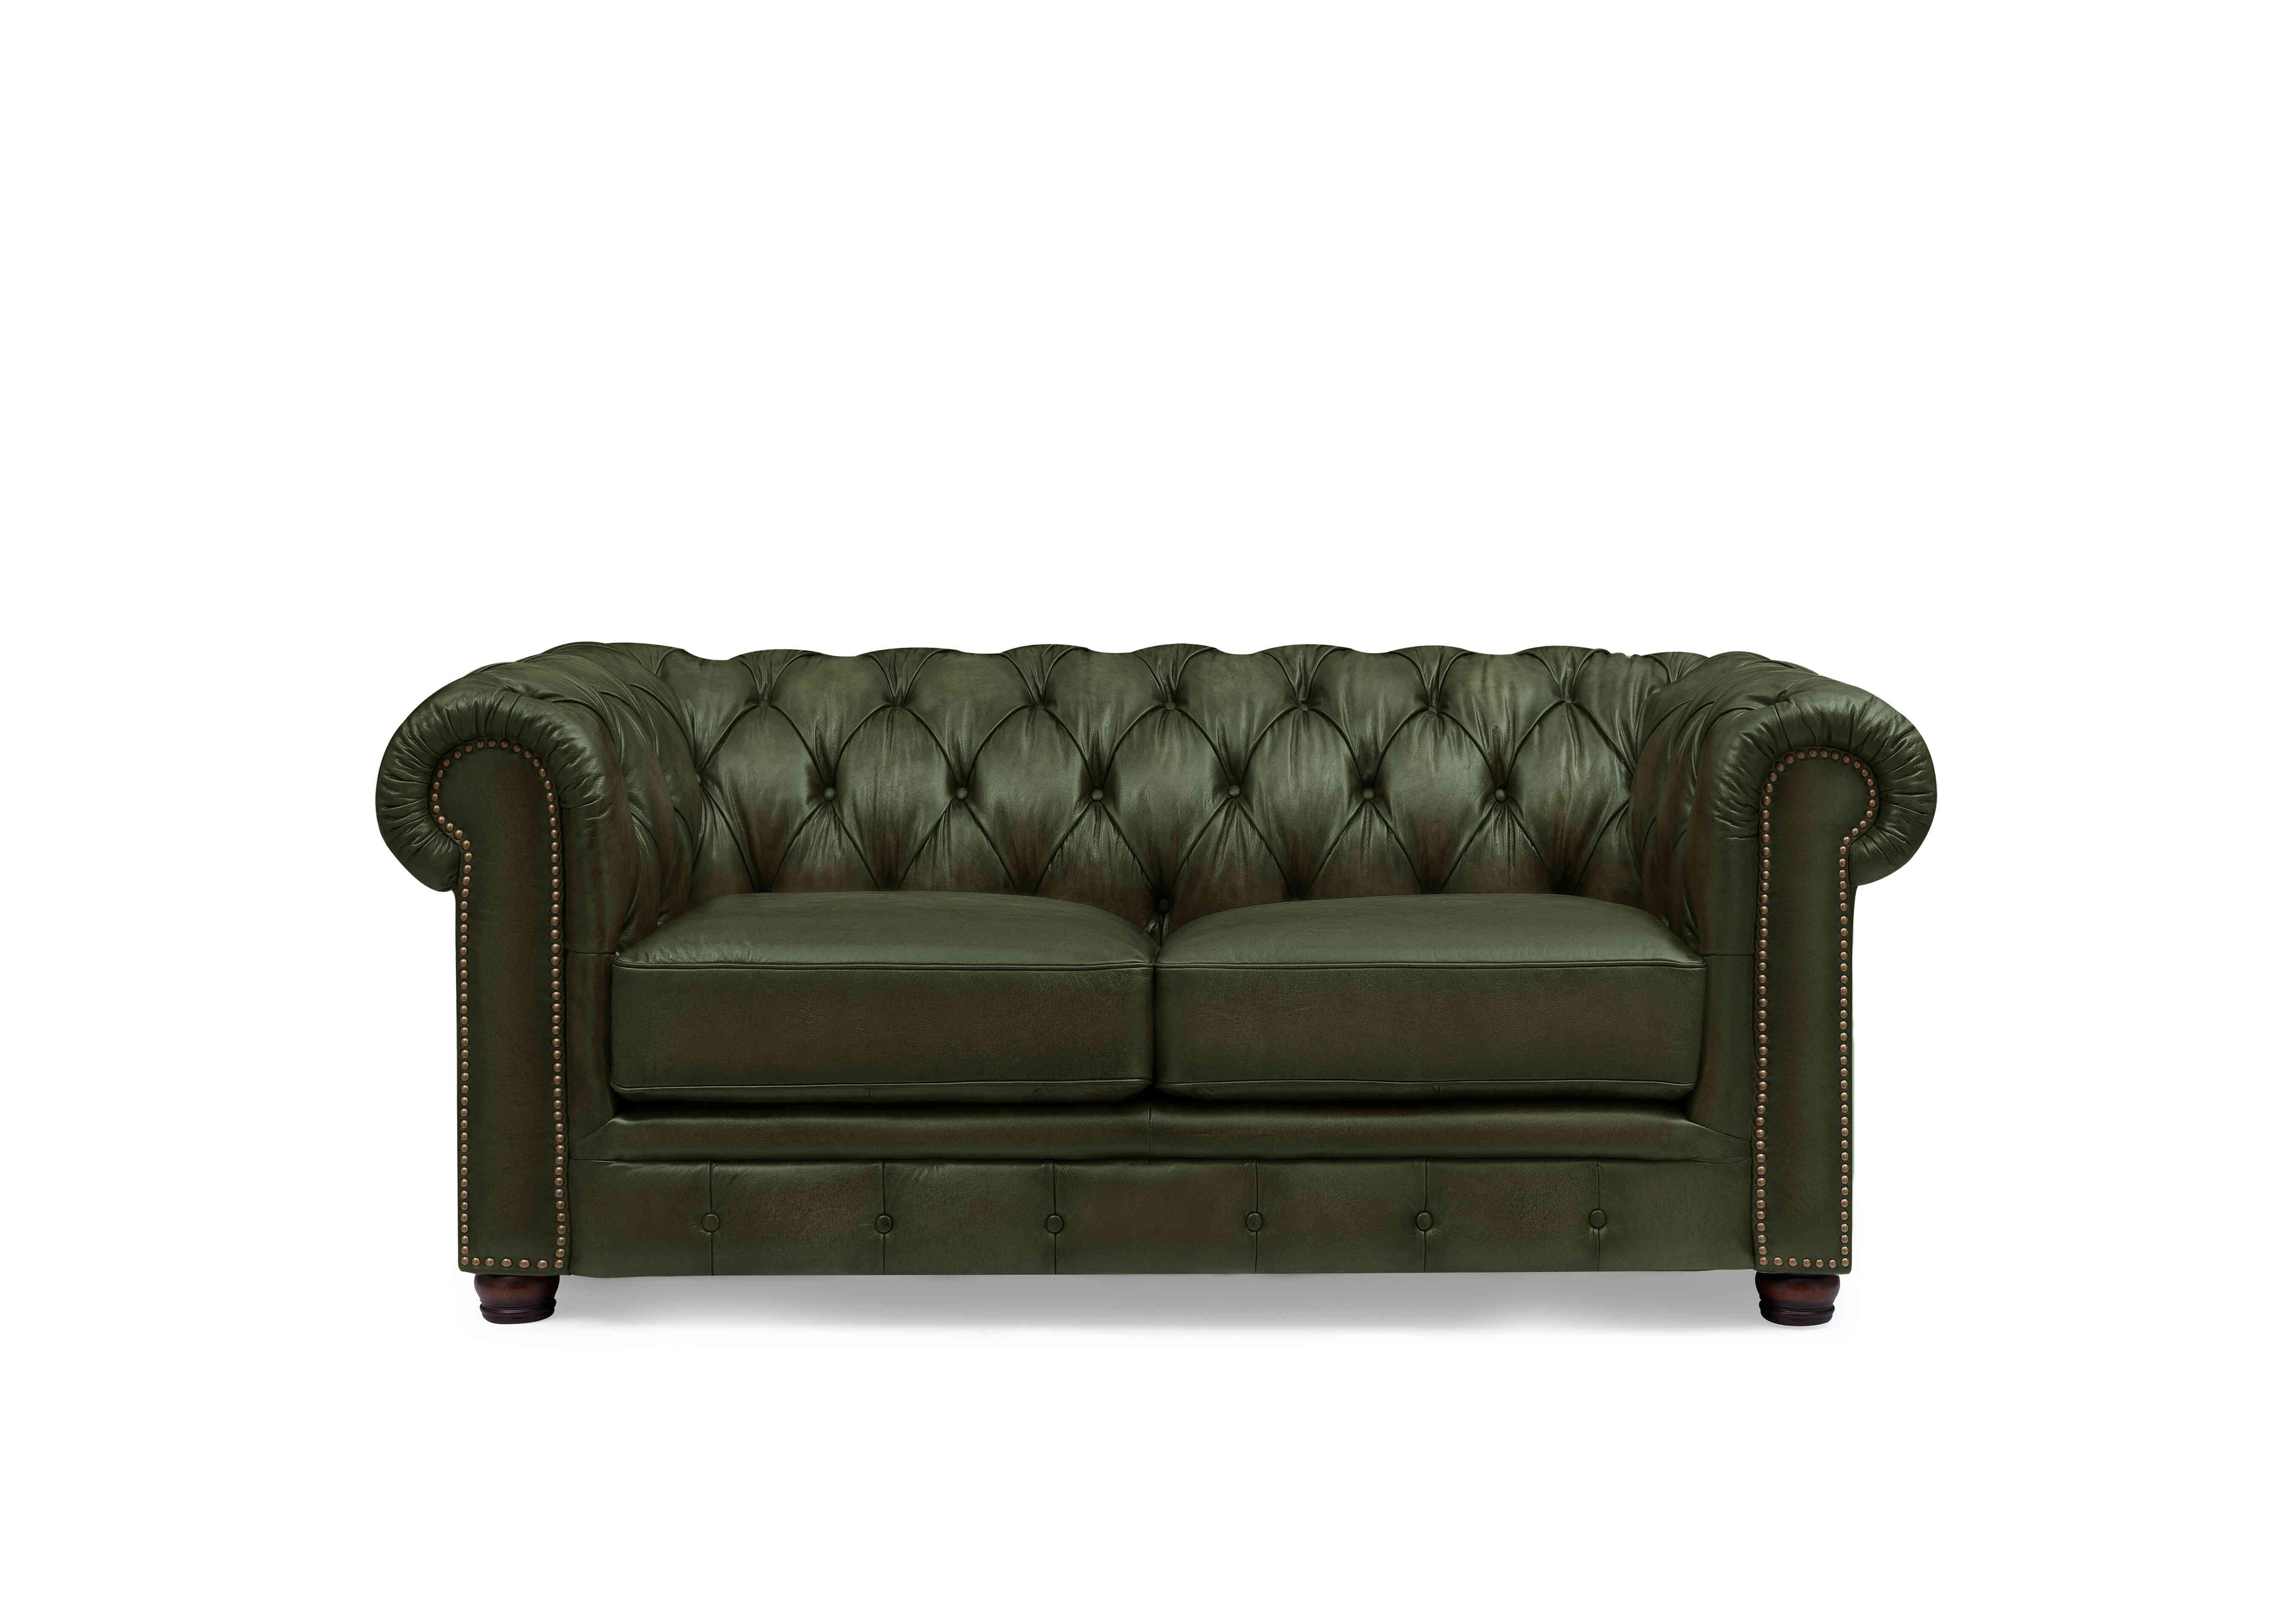 Shackleton 2 Seater Leather Chesterfield Sofa with USB-C in X3y1-1965ls Emerald on Furniture Village